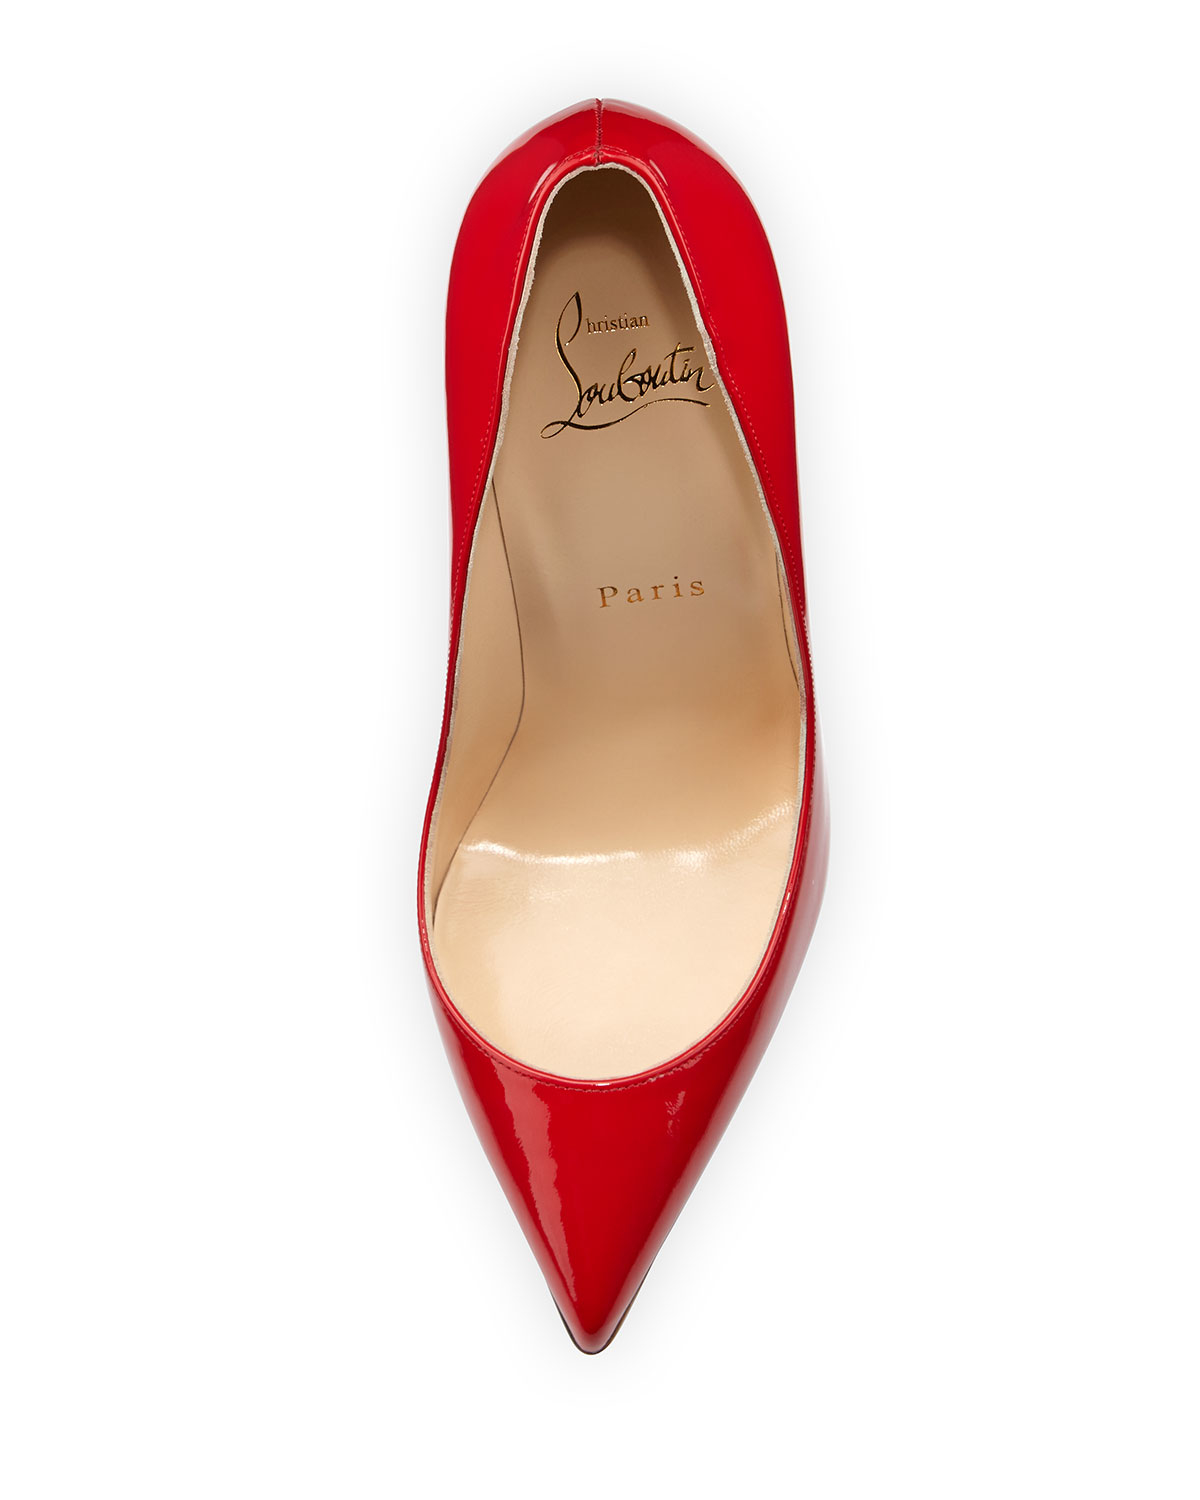 christian louboutin copy - Christian louboutin Pigalle Follies Patent 100mm Red Sole Pump in ...